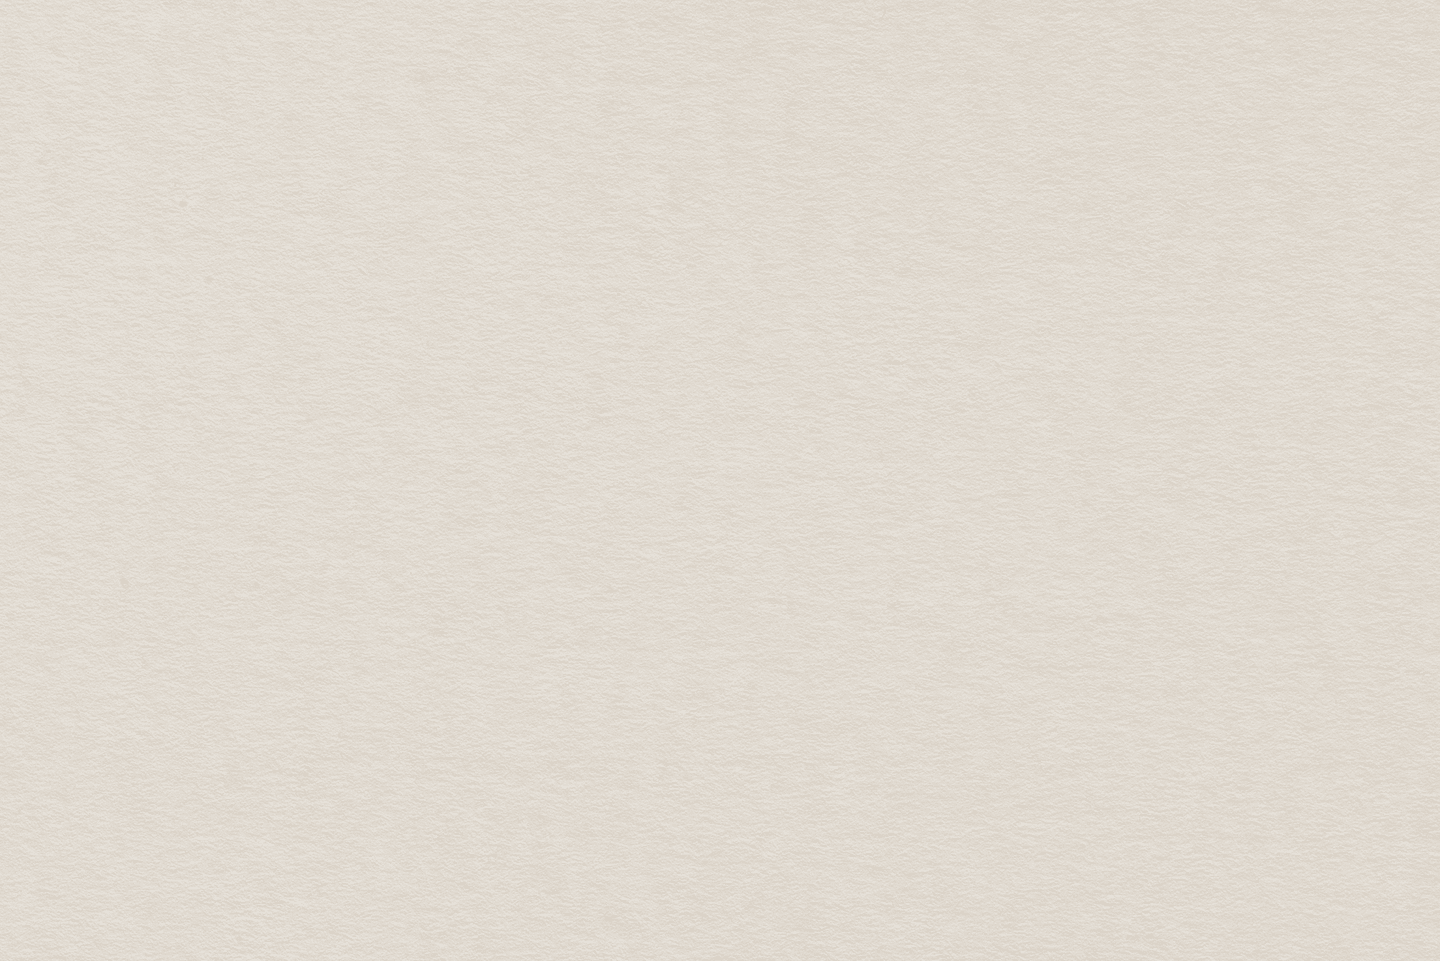 r549-r389-craft-texture-brown-journal-notewebready-16389698693266-16516709339758.png